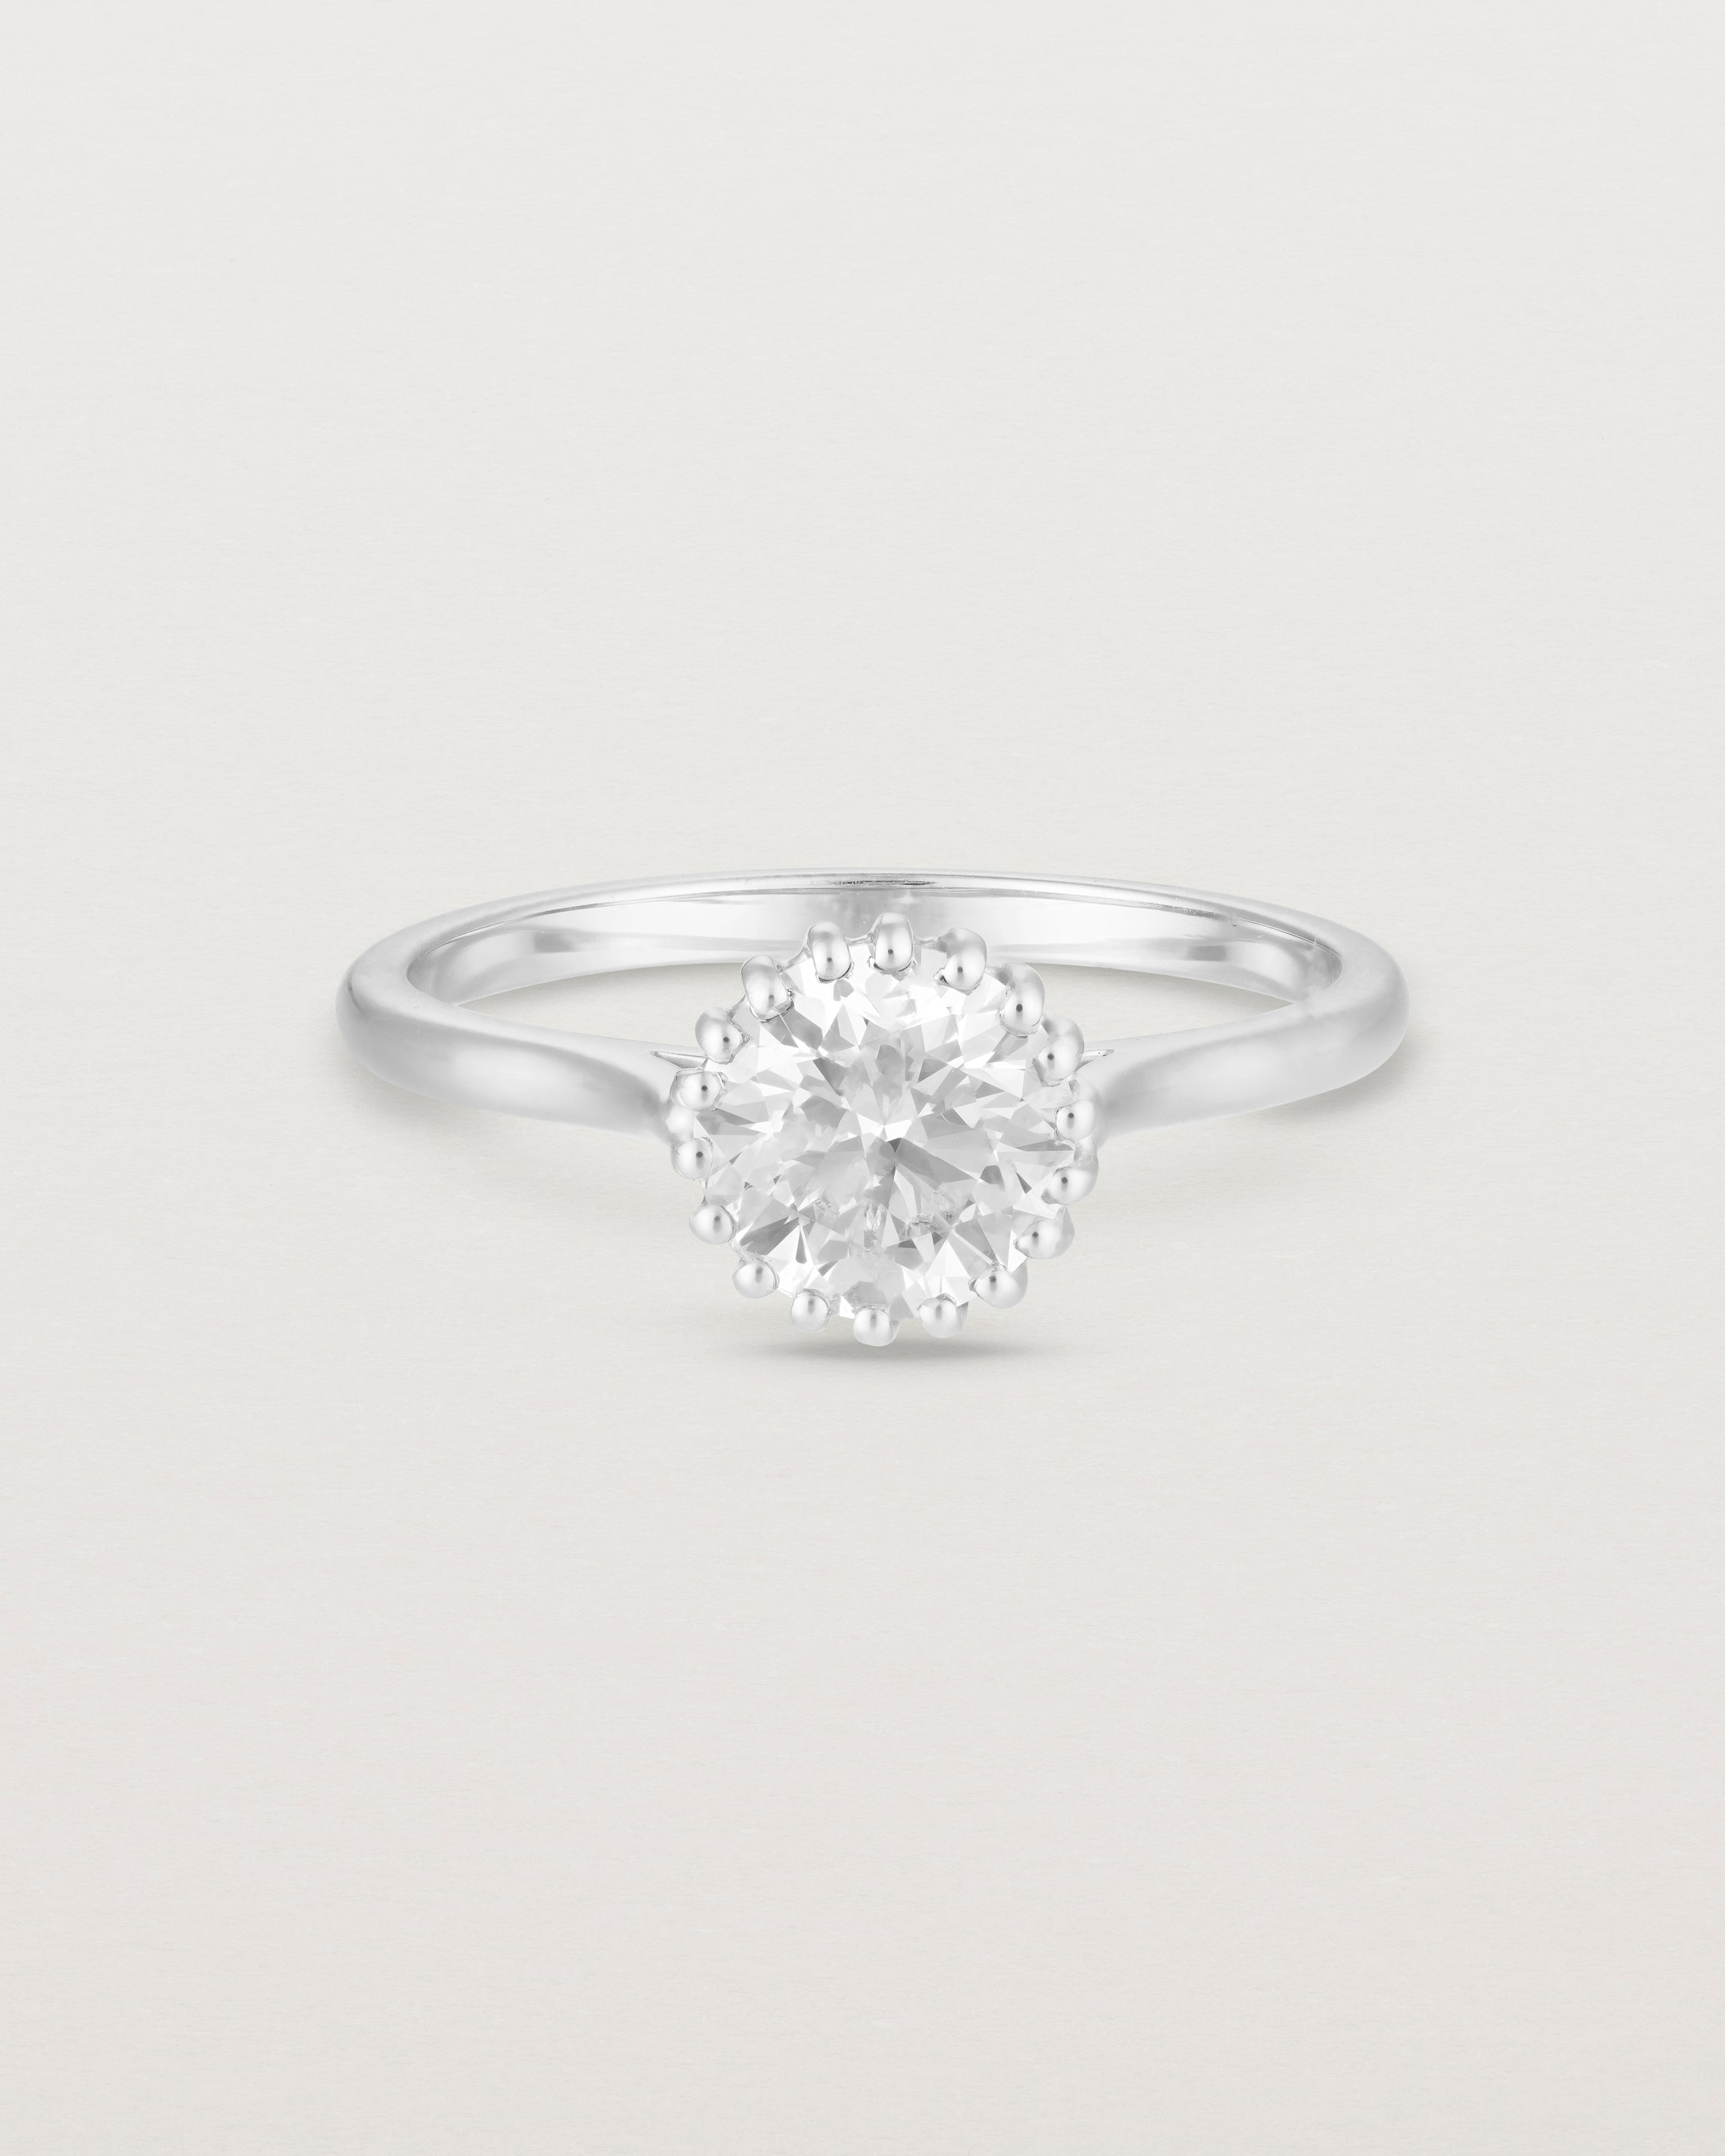 Front view of the Meroë Round Solitaire | Laboratory Grown Diamond in white gold.